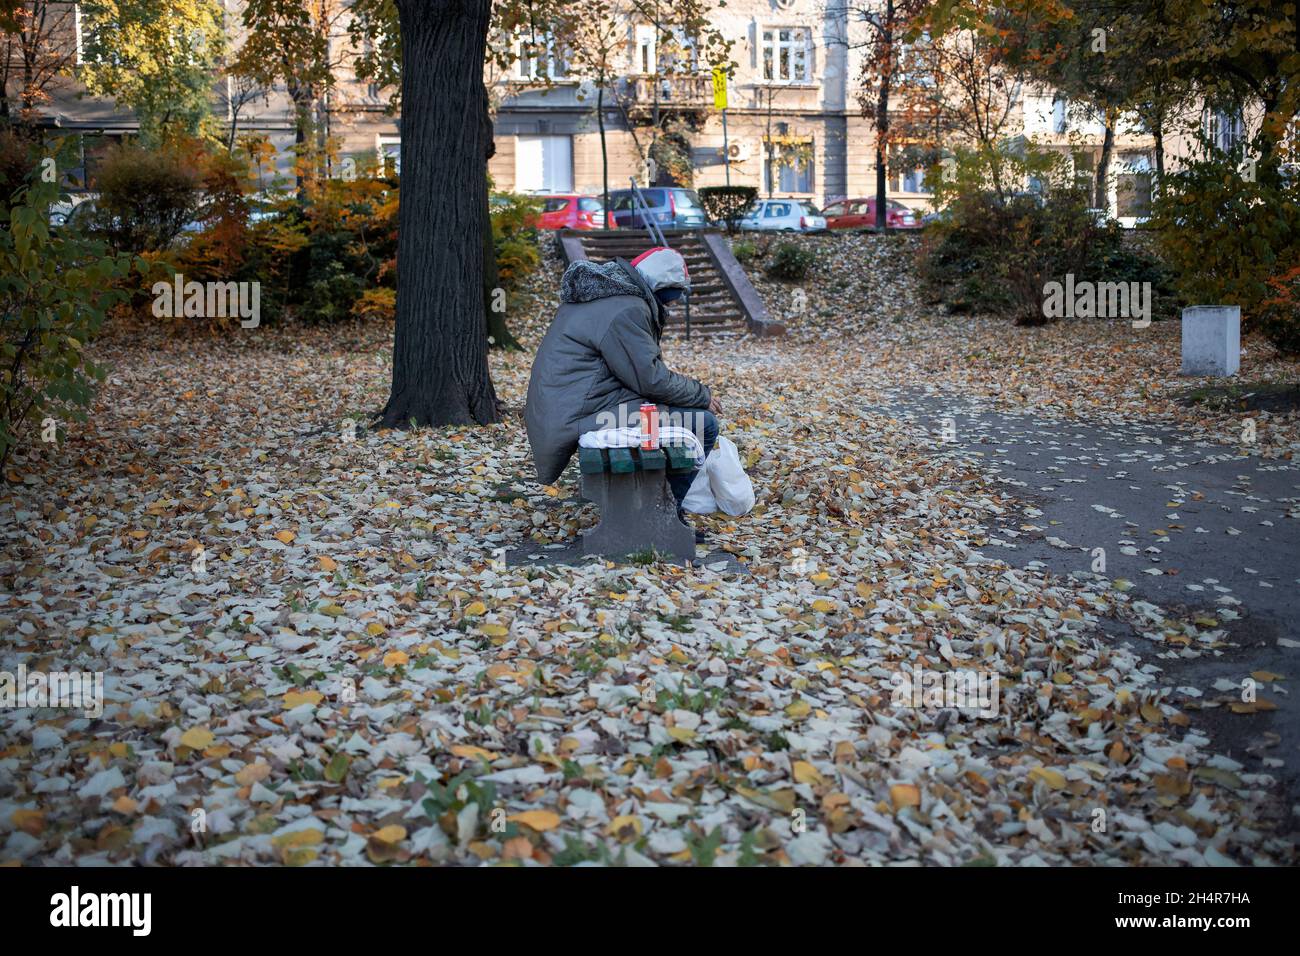 A hooded man sitting on a park bench next to a can of beer Stock Photo